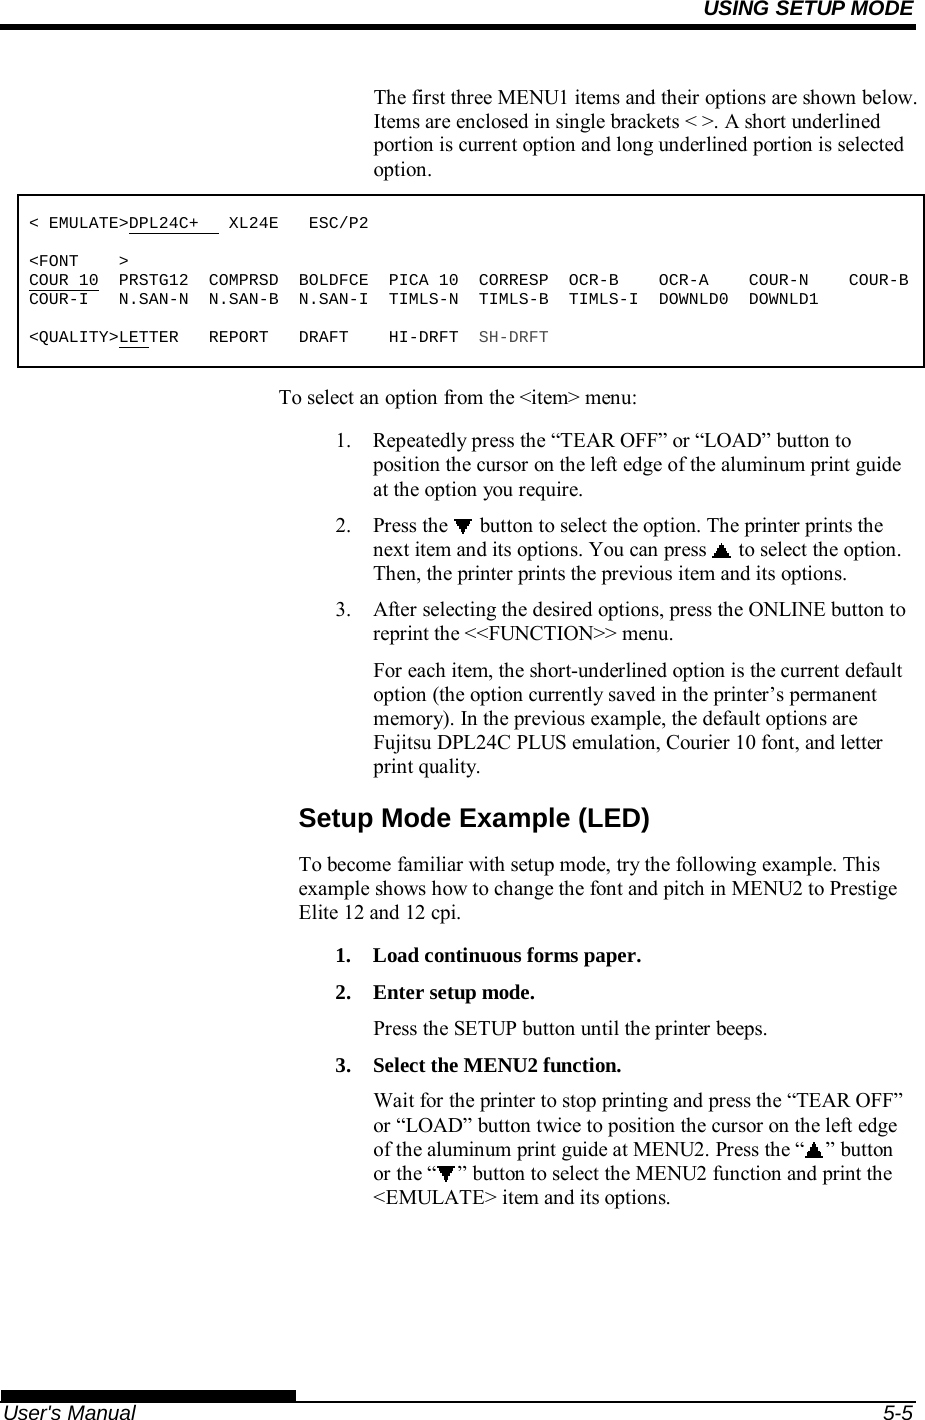 USING SETUP MODE   User&apos;s Manual  5-5 The first three MENU1 items and their options are shown below. Items are enclosed in single brackets &lt; &gt;. A short underlined portion is current option and long underlined portion is selected option.  &lt; EMULATE&gt;DPL24C+   XL24E   ESC/P2  &lt;FONT    &gt; COUR 10  PRSTG12  COMPRSD  BOLDFCE  PICA 10  CORRESP  OCR-B    OCR-A    COUR-N    COUR-BCOUR-I   N.SAN-N  N.SAN-B  N.SAN-I  TIMLS-N  TIMLS-B  TIMLS-I  DOWNLD0  DOWNLD1  &lt;QUALITY&gt;LETTER   REPORT   DRAFT    HI-DRFT  SH-DRFT To select an option from the &lt;item&gt; menu: 1.  Repeatedly press the “TEAR OFF” or “LOAD” button to position the cursor on the left edge of the aluminum print guide at the option you require. 2.  Press the   button to select the option. The printer prints the next item and its options. You can press   to select the option.  Then, the printer prints the previous item and its options. 3.  After selecting the desired options, press the ONLINE button to reprint the &lt;&lt;FUNCTION&gt;&gt; menu. For each item, the short-underlined option is the current default option (the option currently saved in the printer’s permanent memory). In the previous example, the default options are Fujitsu DPL24C PLUS emulation, Courier 10 font, and letter print quality. Setup Mode Example (LED) To become familiar with setup mode, try the following example. This example shows how to change the font and pitch in MENU2 to Prestige Elite 12 and 12 cpi. 1.  Load continuous forms paper. 2.  Enter setup mode. Press the SETUP button until the printer beeps. 3.  Select the MENU2 function. Wait for the printer to stop printing and press the “TEAR OFF” or “LOAD” button twice to position the cursor on the left edge of the aluminum print guide at MENU2. Press the “ ” button or the “ ” button to select the MENU2 function and print the &lt;EMULATE&gt; item and its options.  